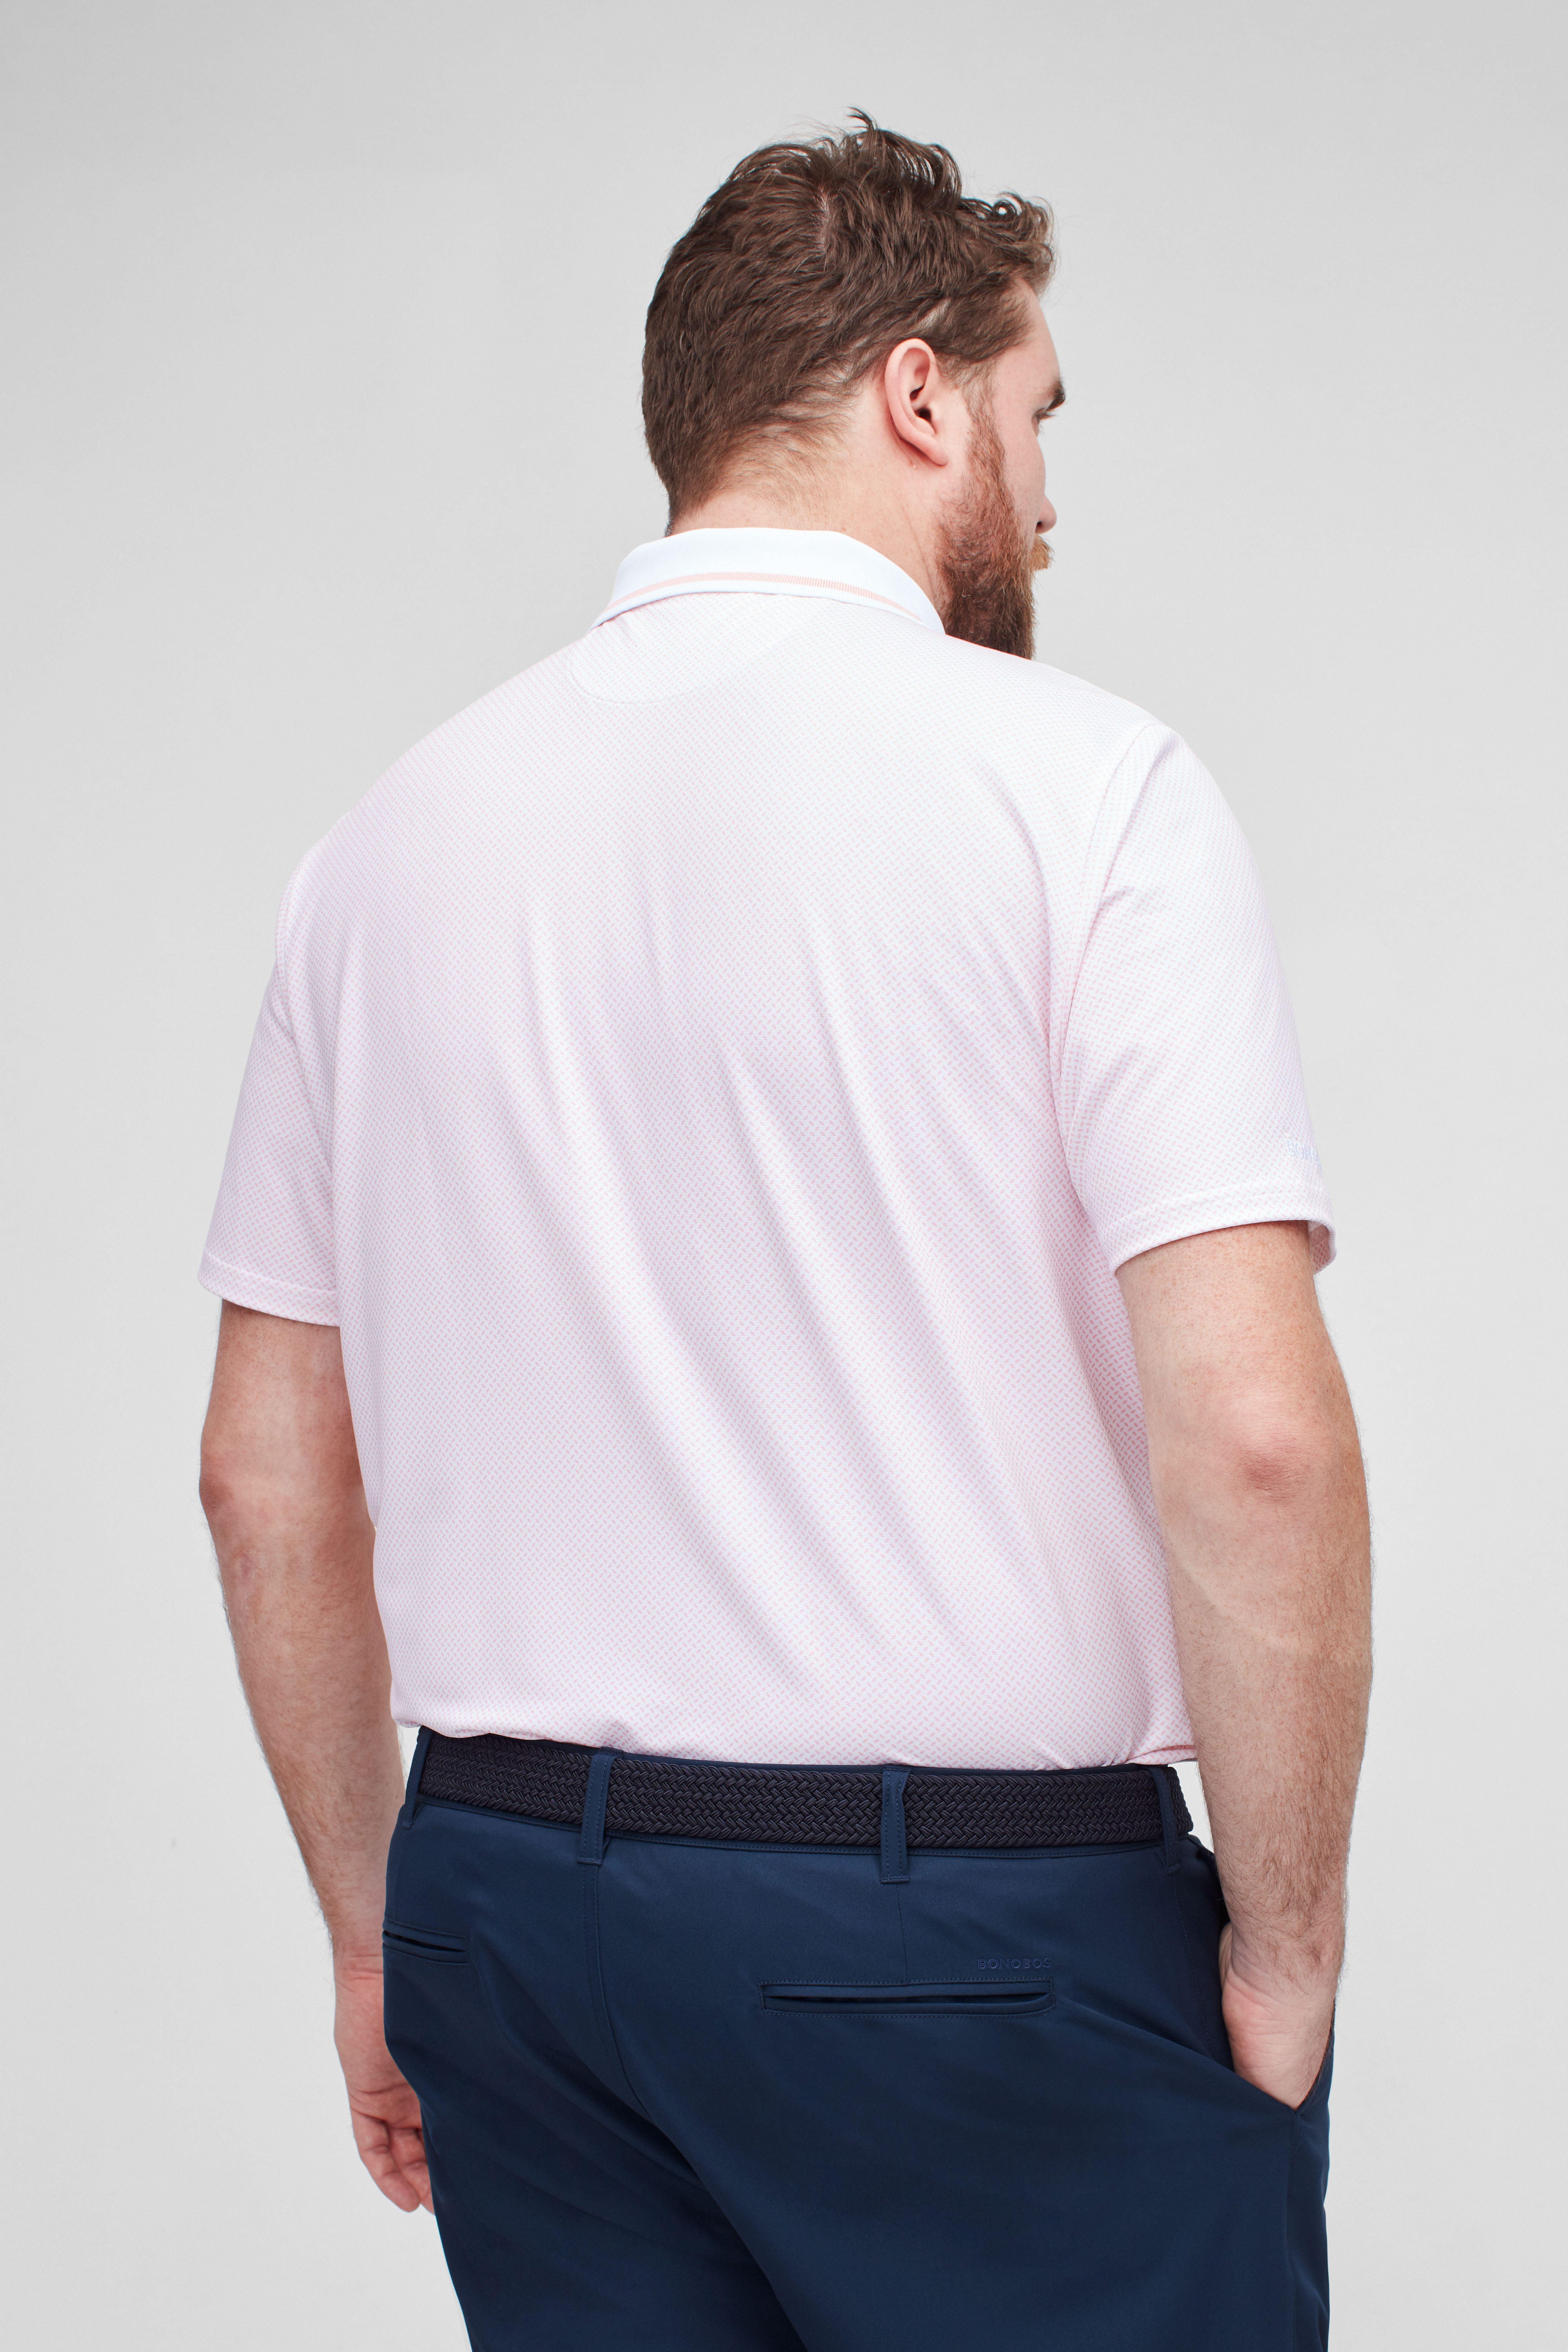 Performance Golf Polo Shirt in Extended Sizes